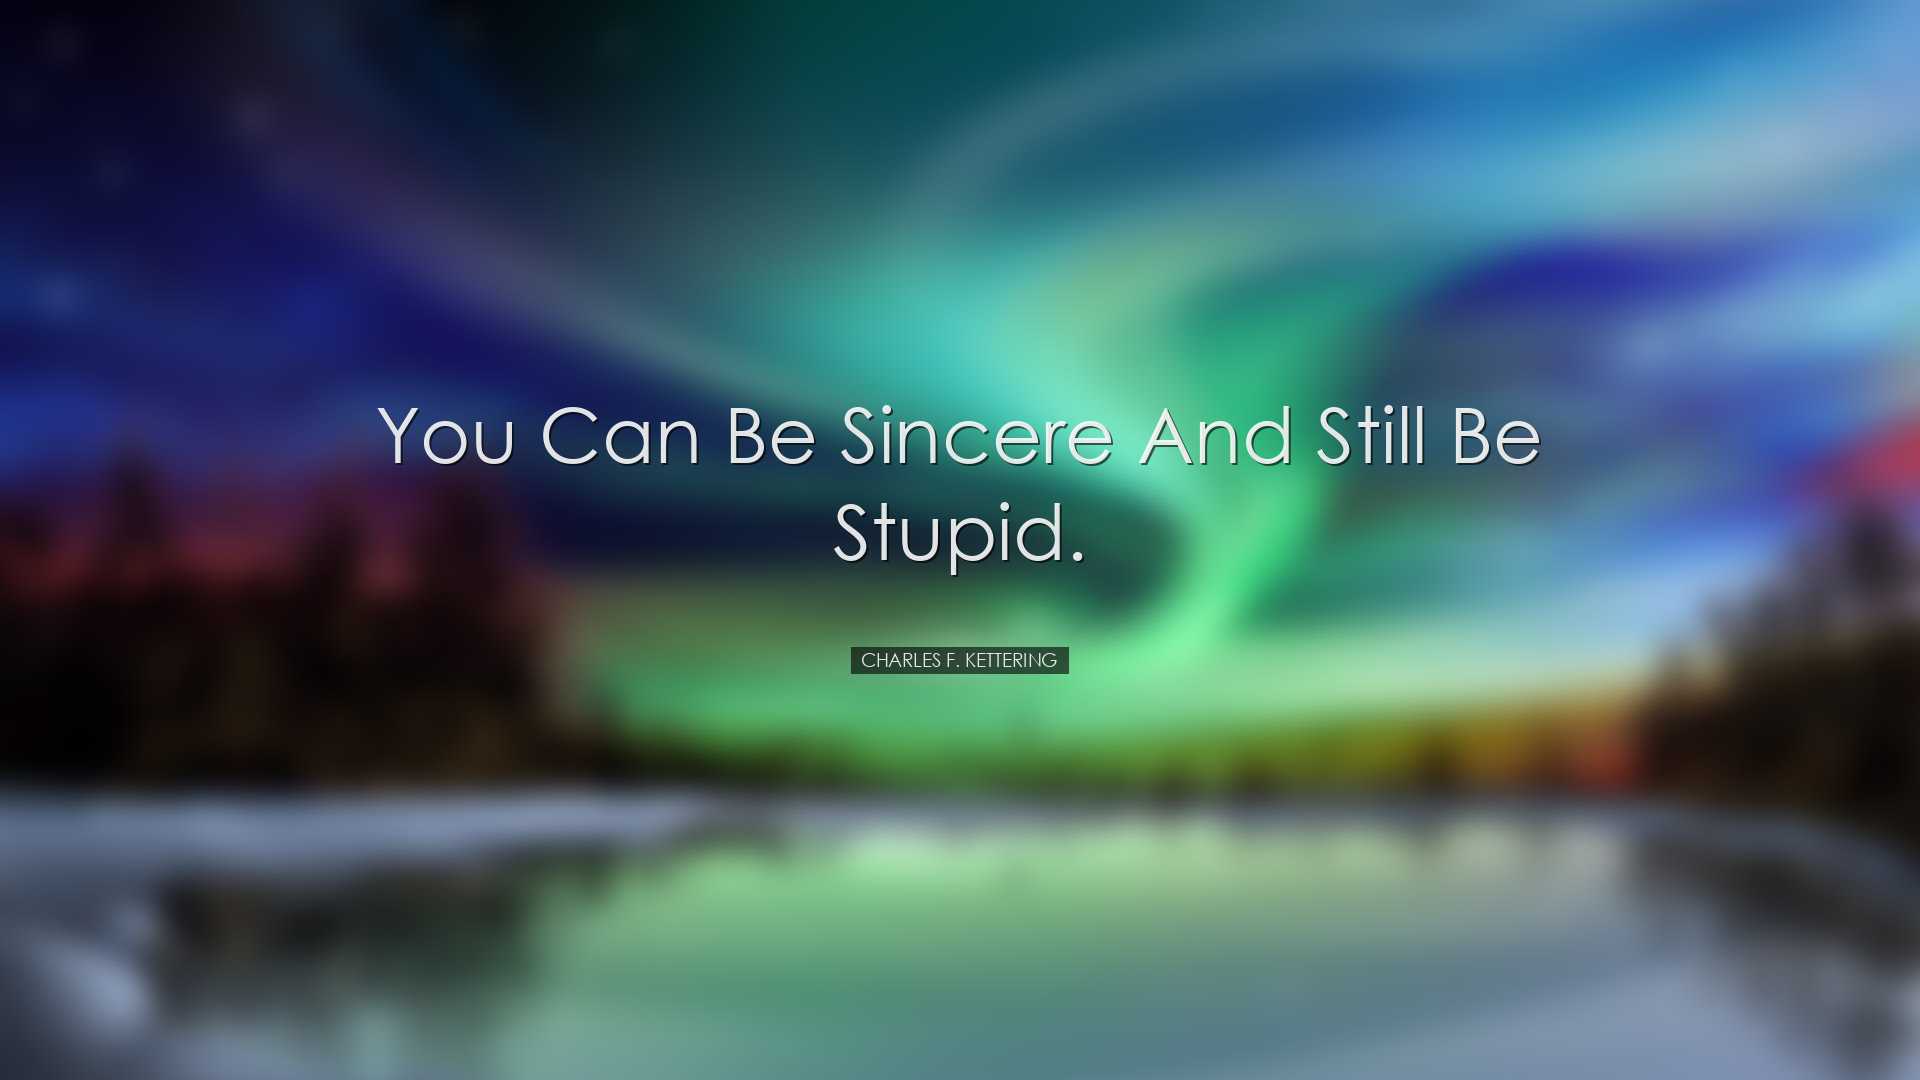 You can be sincere and still be stupid. - Charles F. Kettering